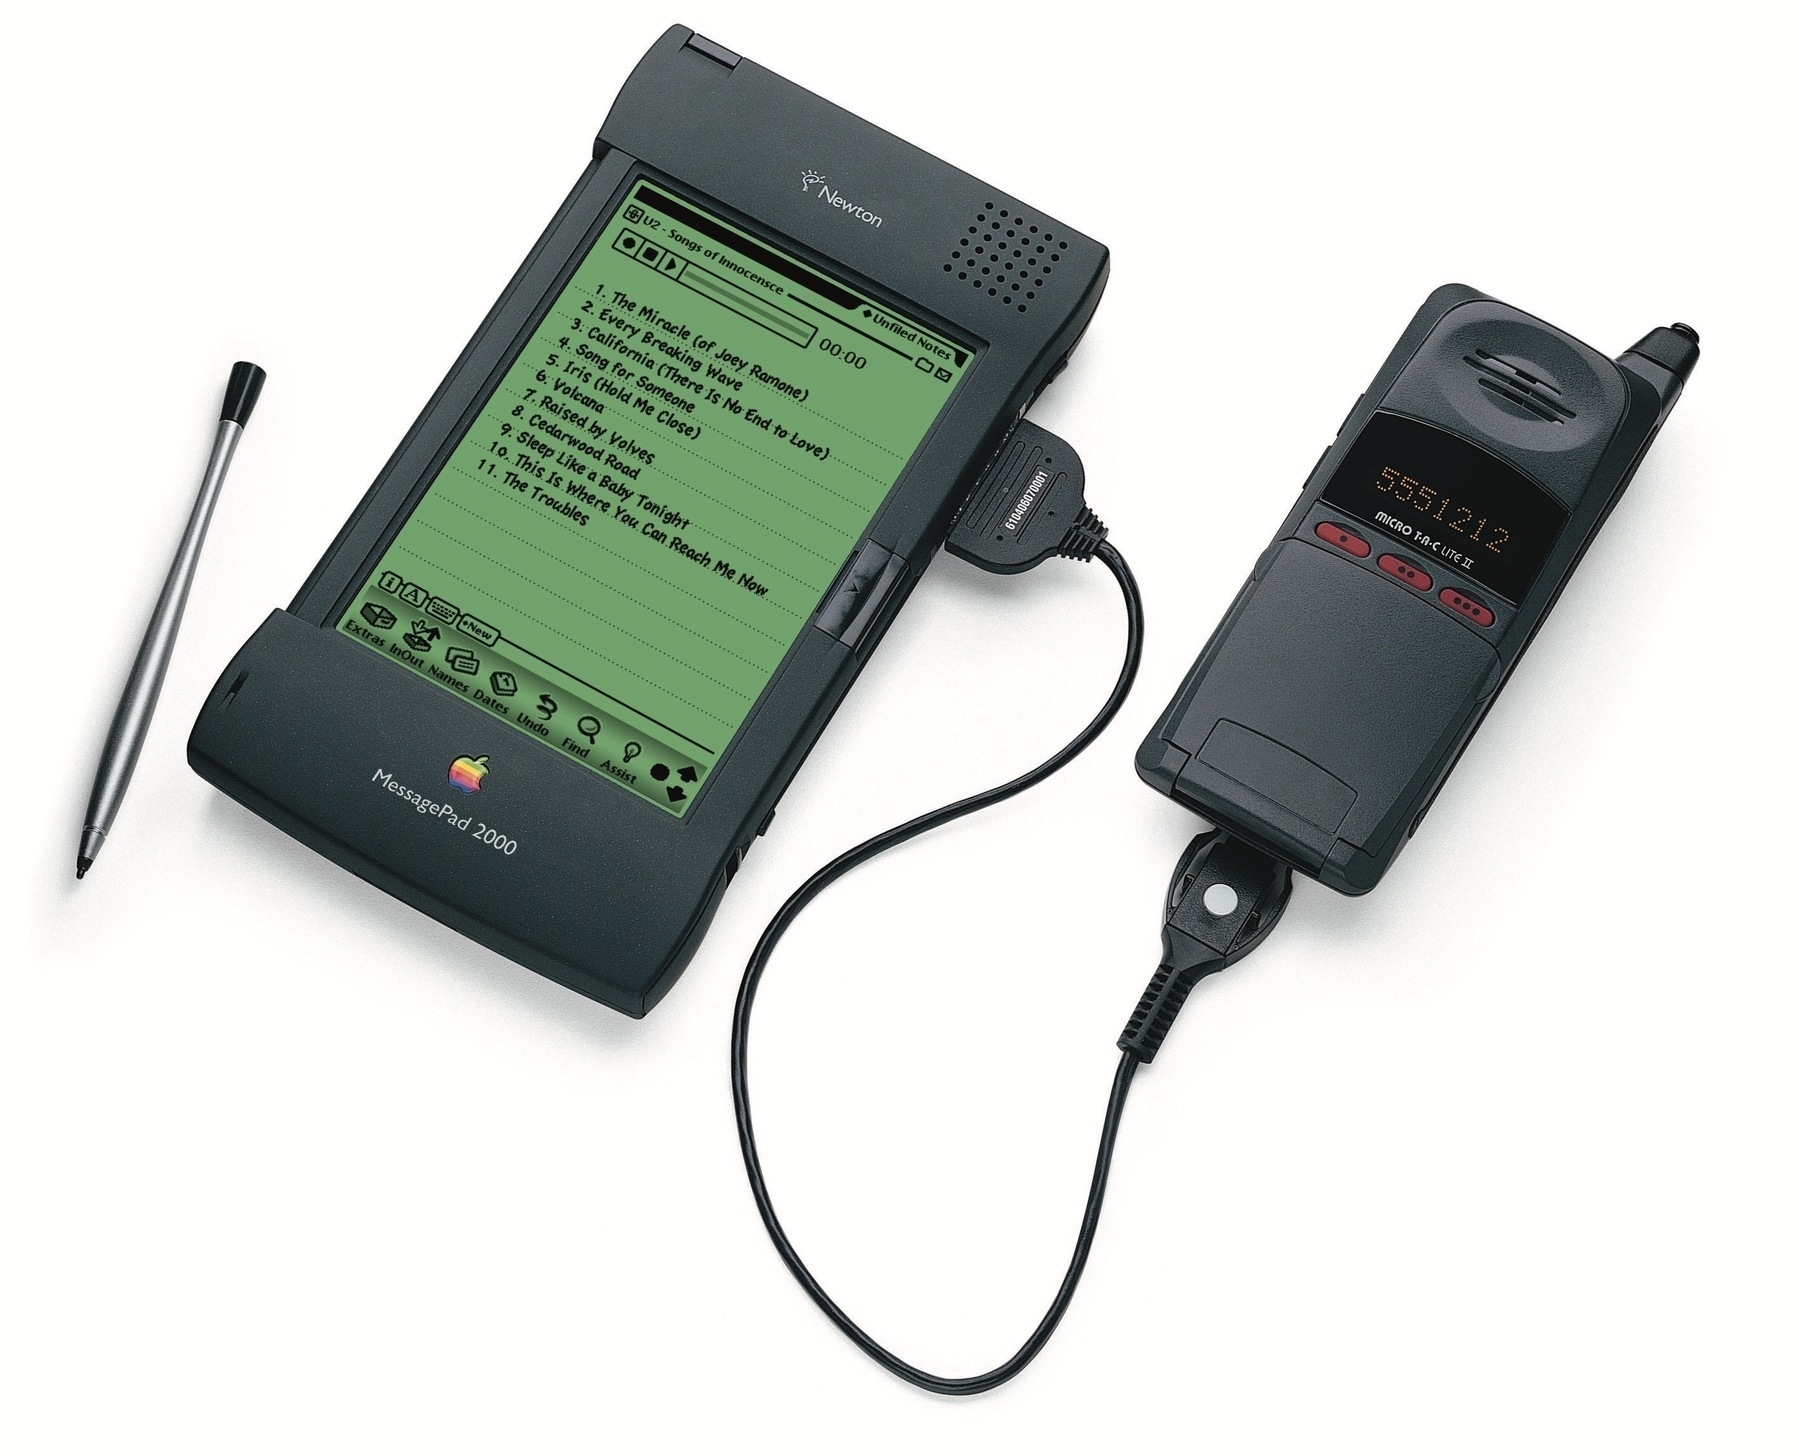 Newton MessagePad 2000 connected to a cell phone with a track listing for U2's Songs of Inocense on the display